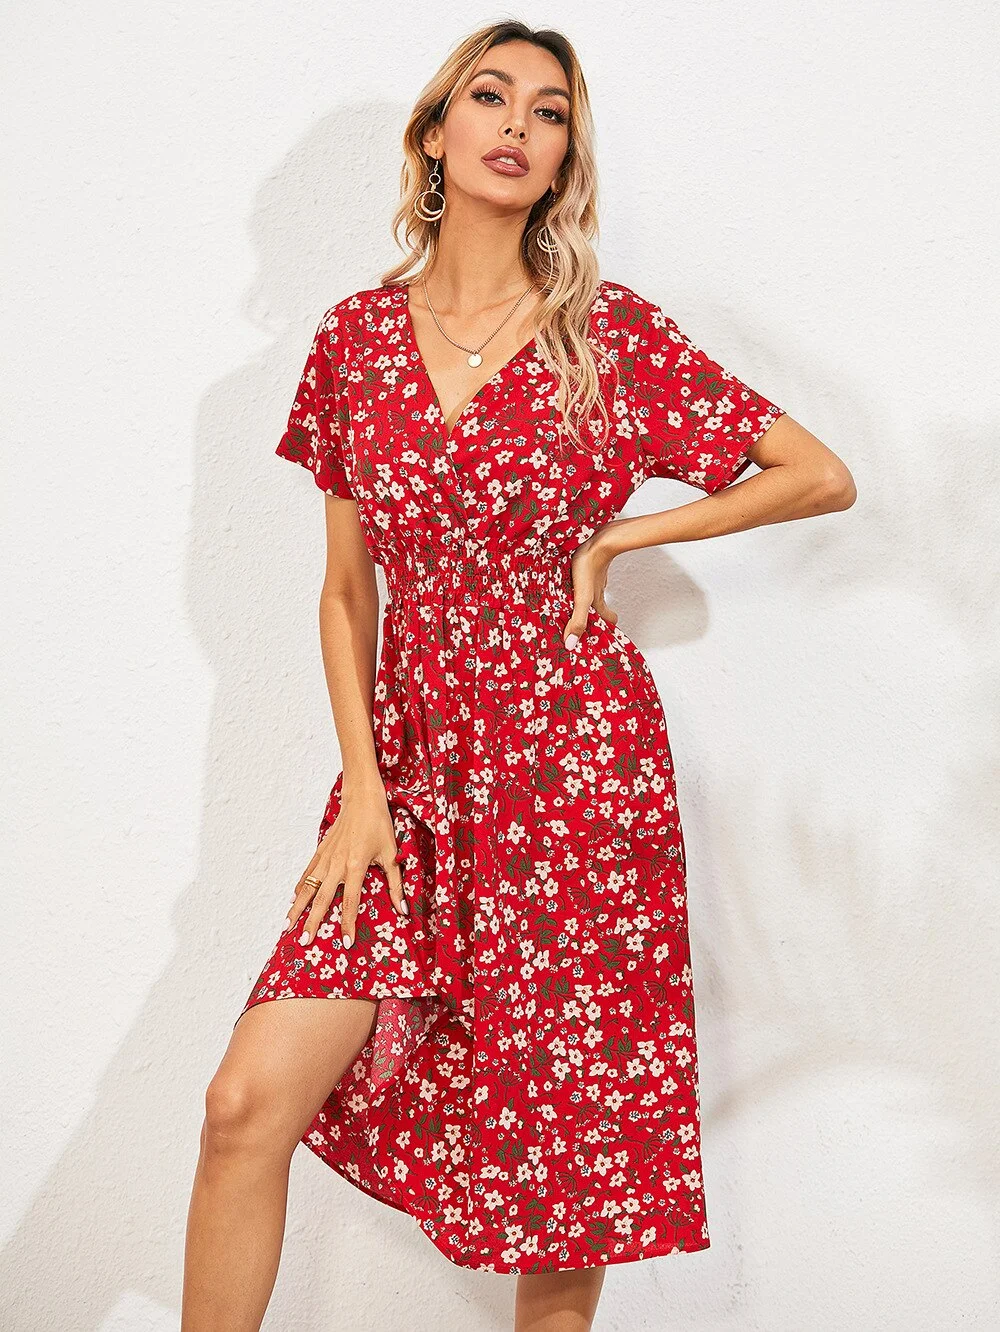 Abebey Back To School Fashion Printed V Neck Casual Loose High Waist Short Sleeve Floral  Summer For Women's Dresses 2023 Woman Vacation Dresses